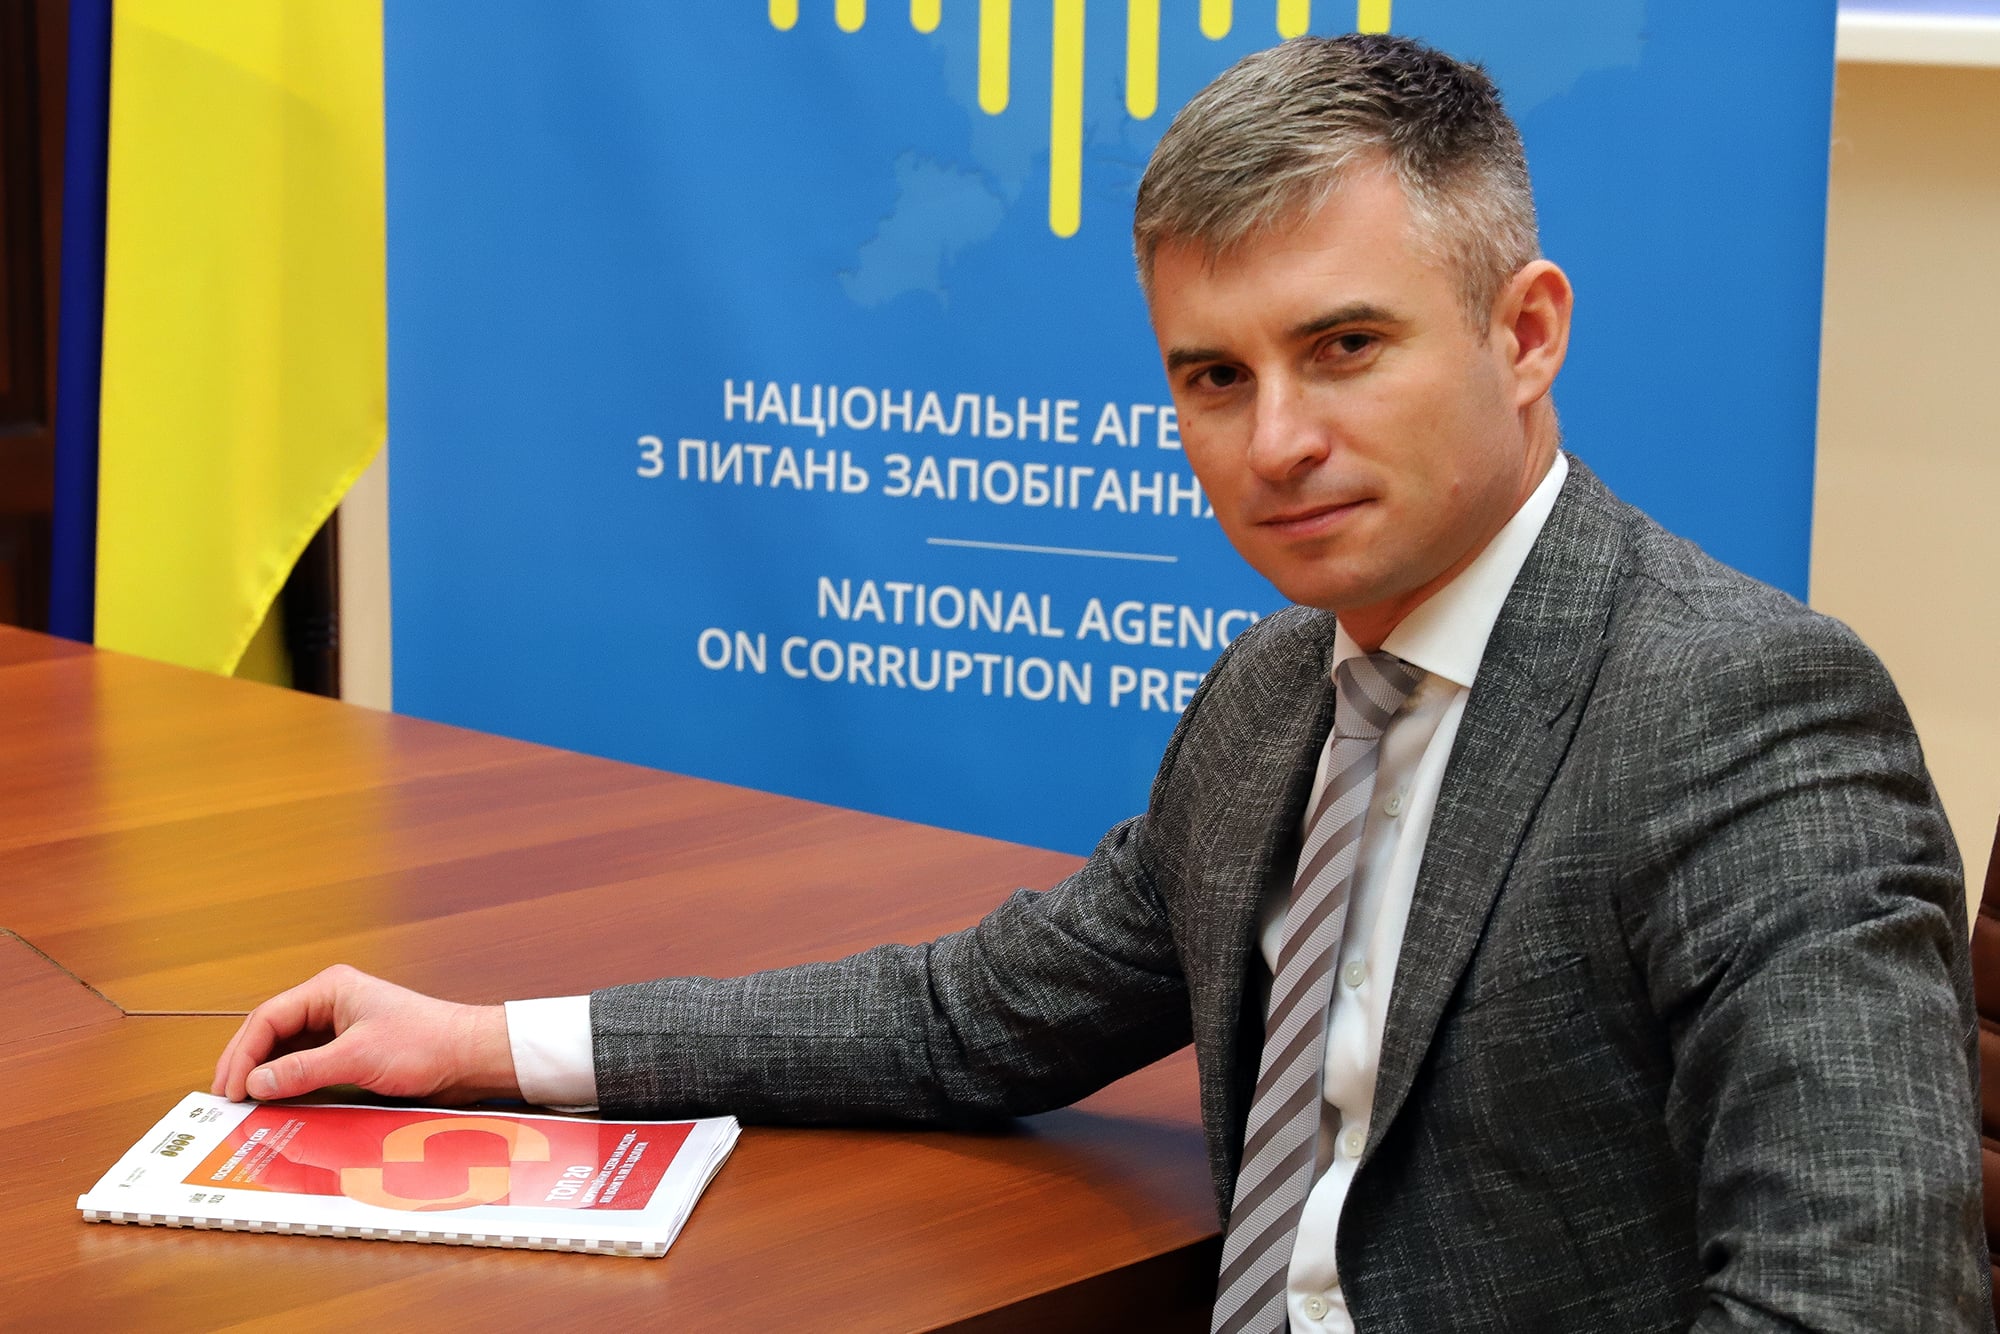 Oleksandr Novikov, chairman of the National Agency for Prevention of Corruption of Ukraine with the Top 20 Local Corruption Schemes – How to Overcome Them handbook. © IWPR